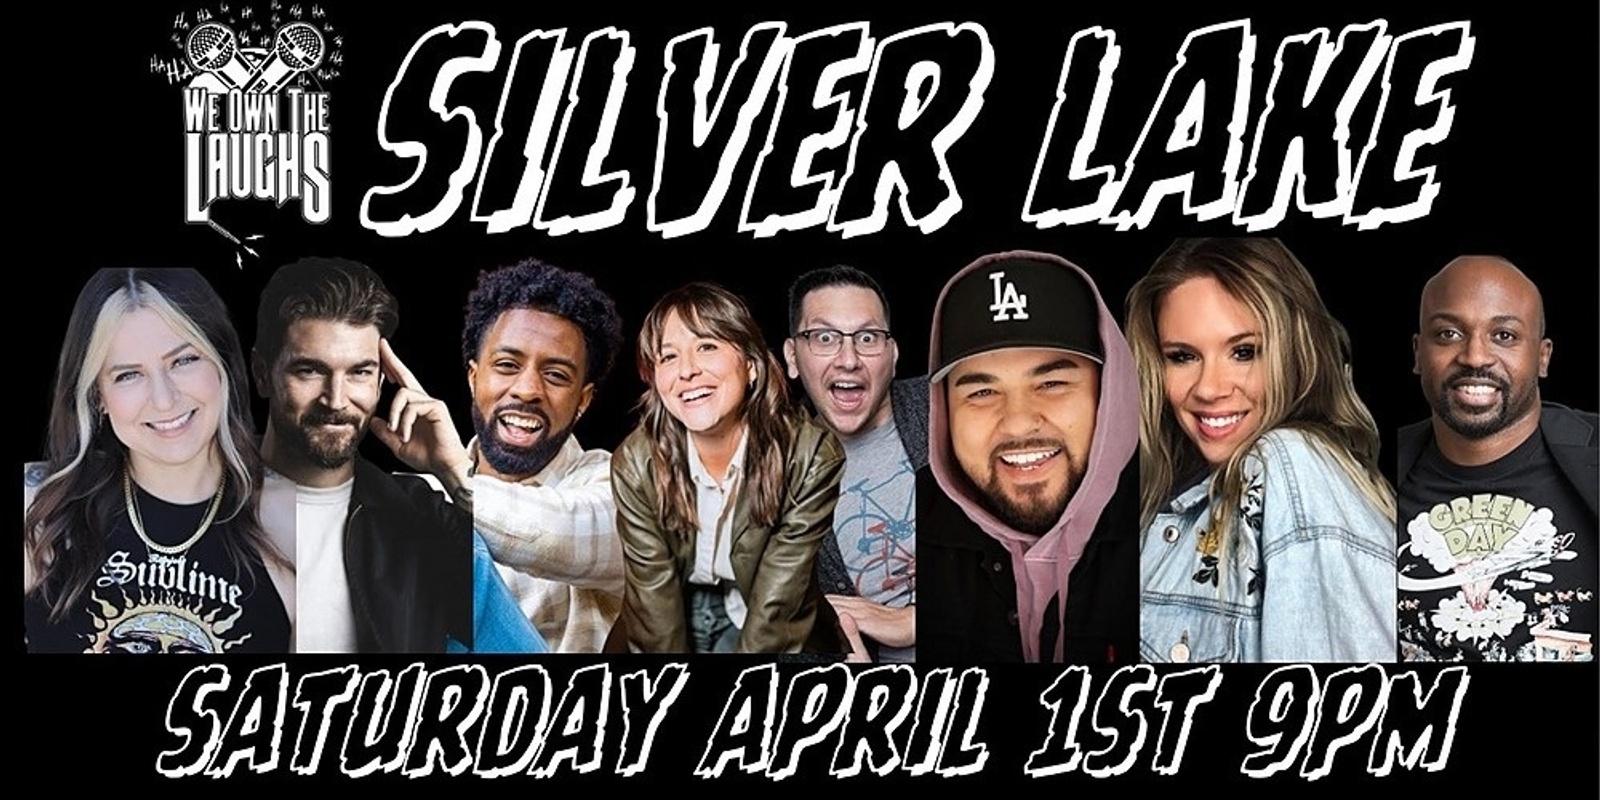 We Own The Laughs: Silver Lake (Starring Malik Bazille) 